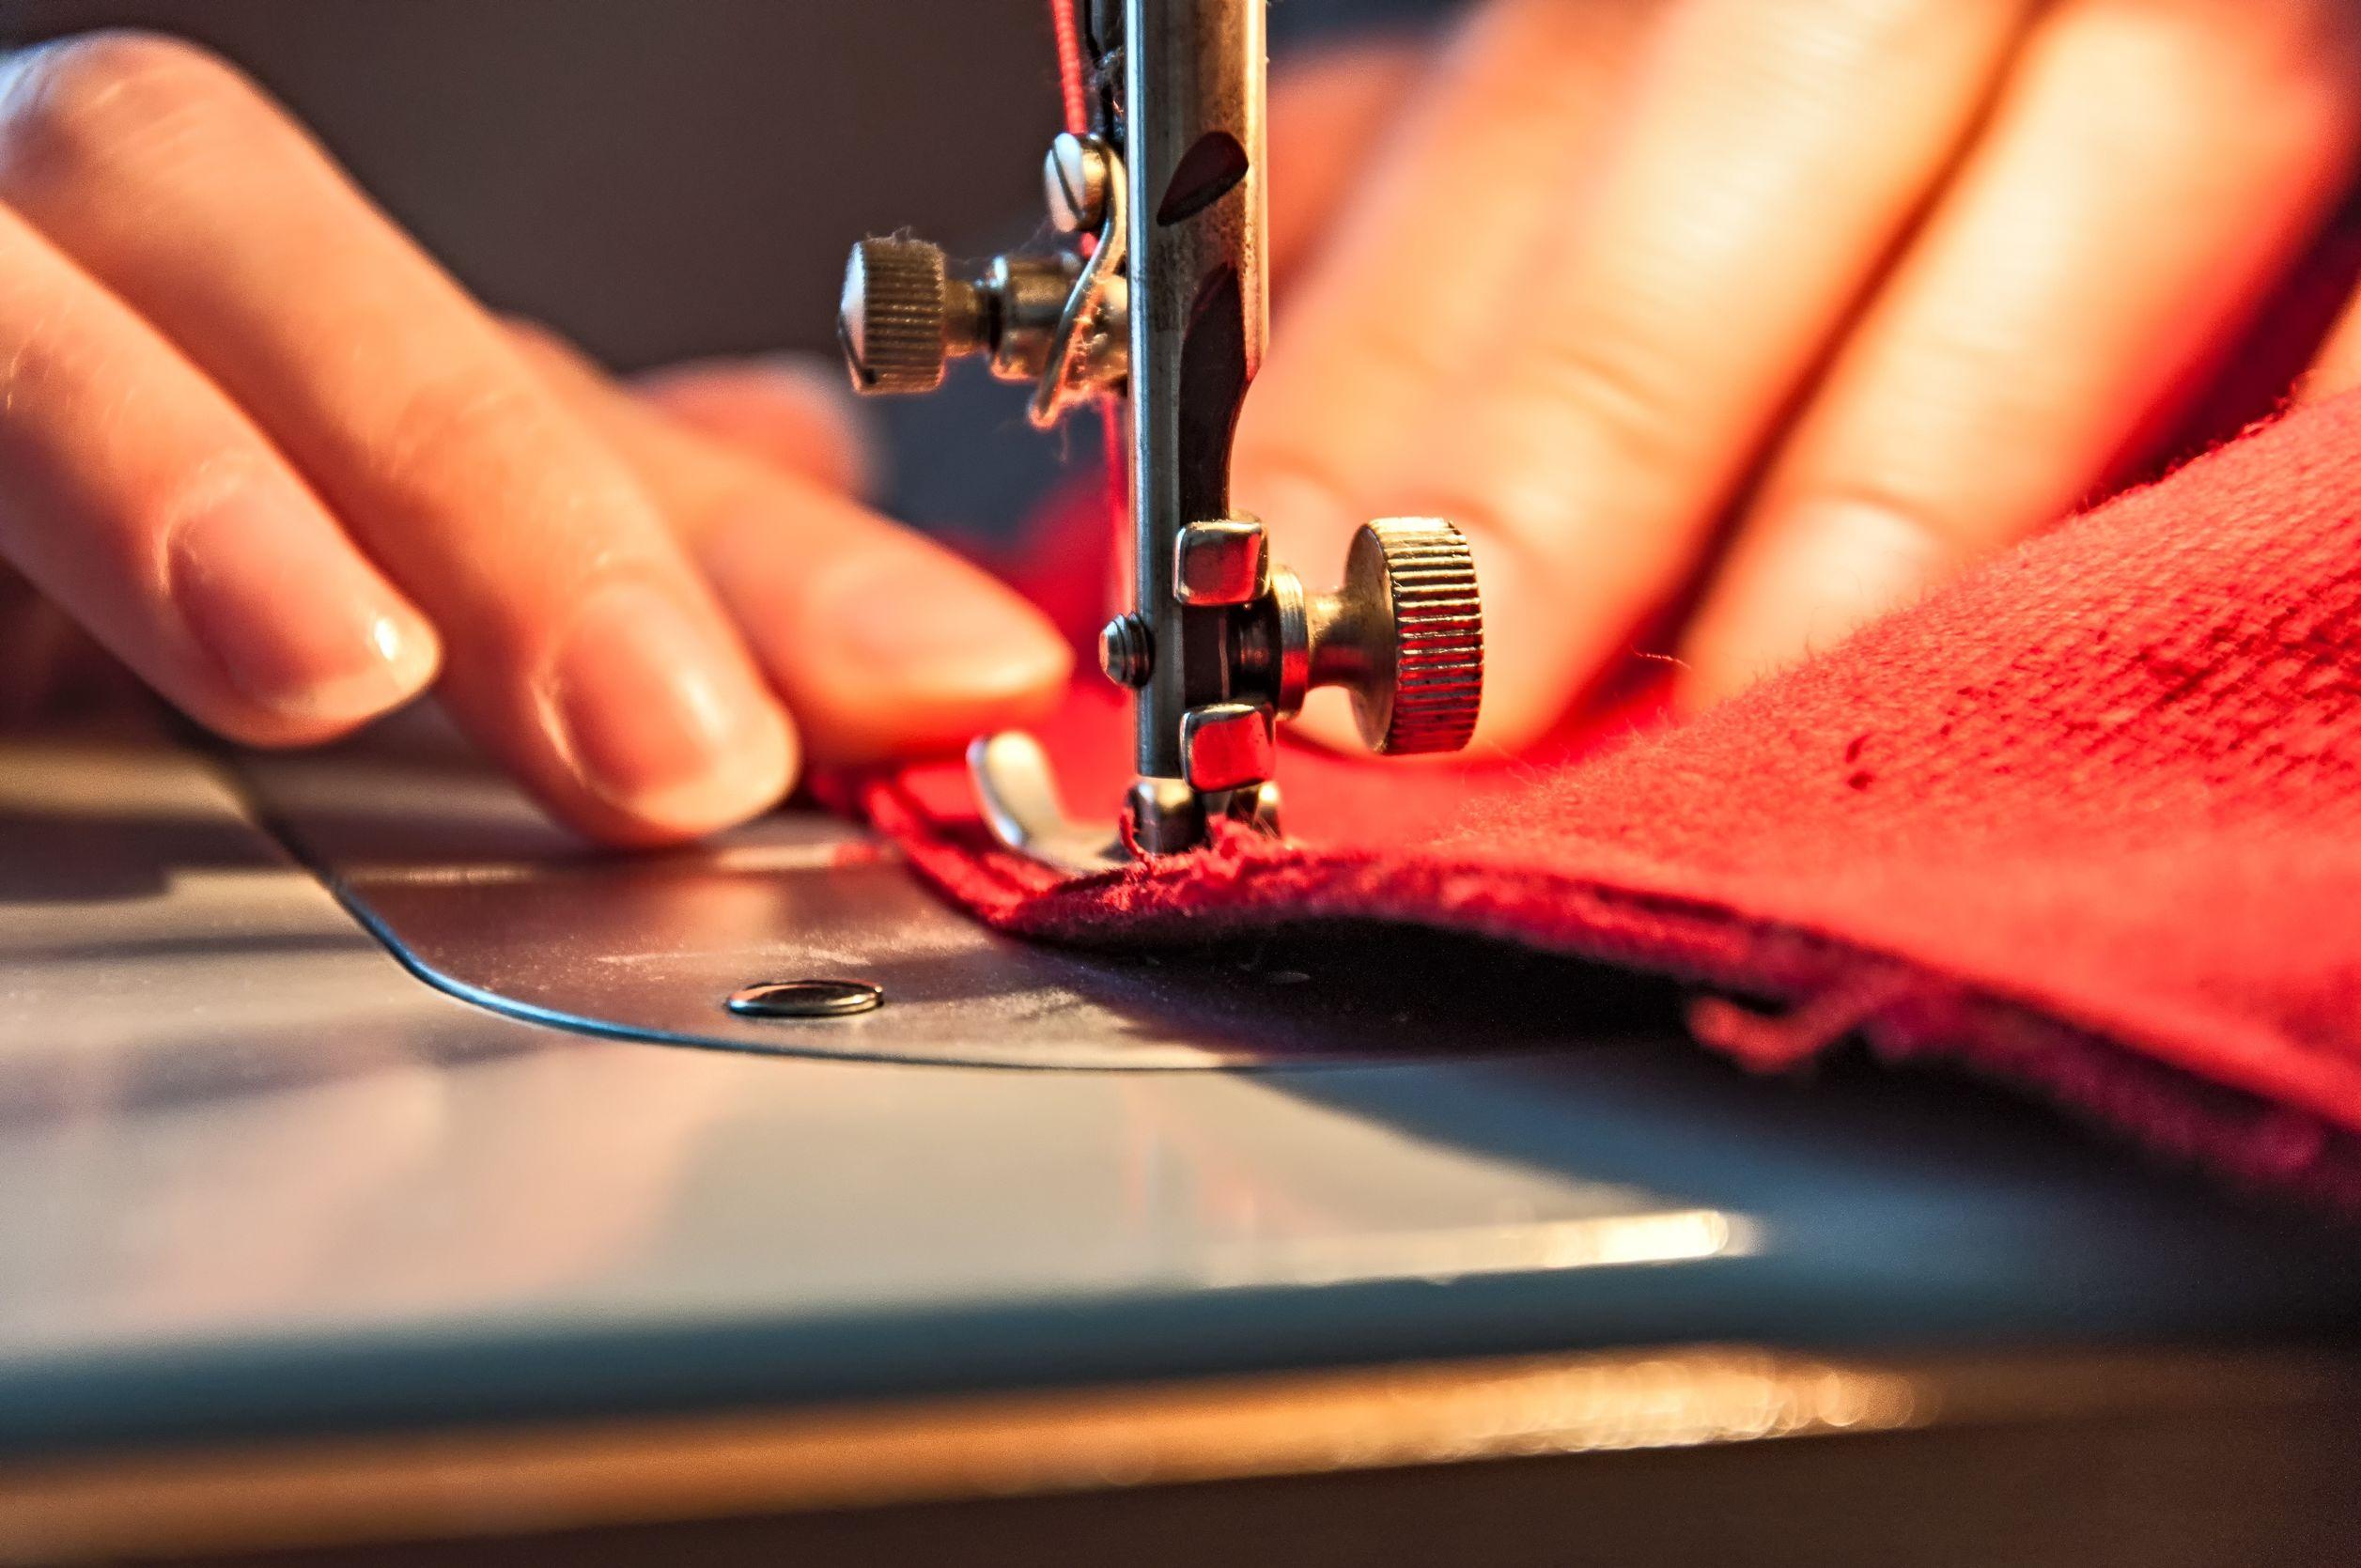 Sewing: for Beginners May to June 2020